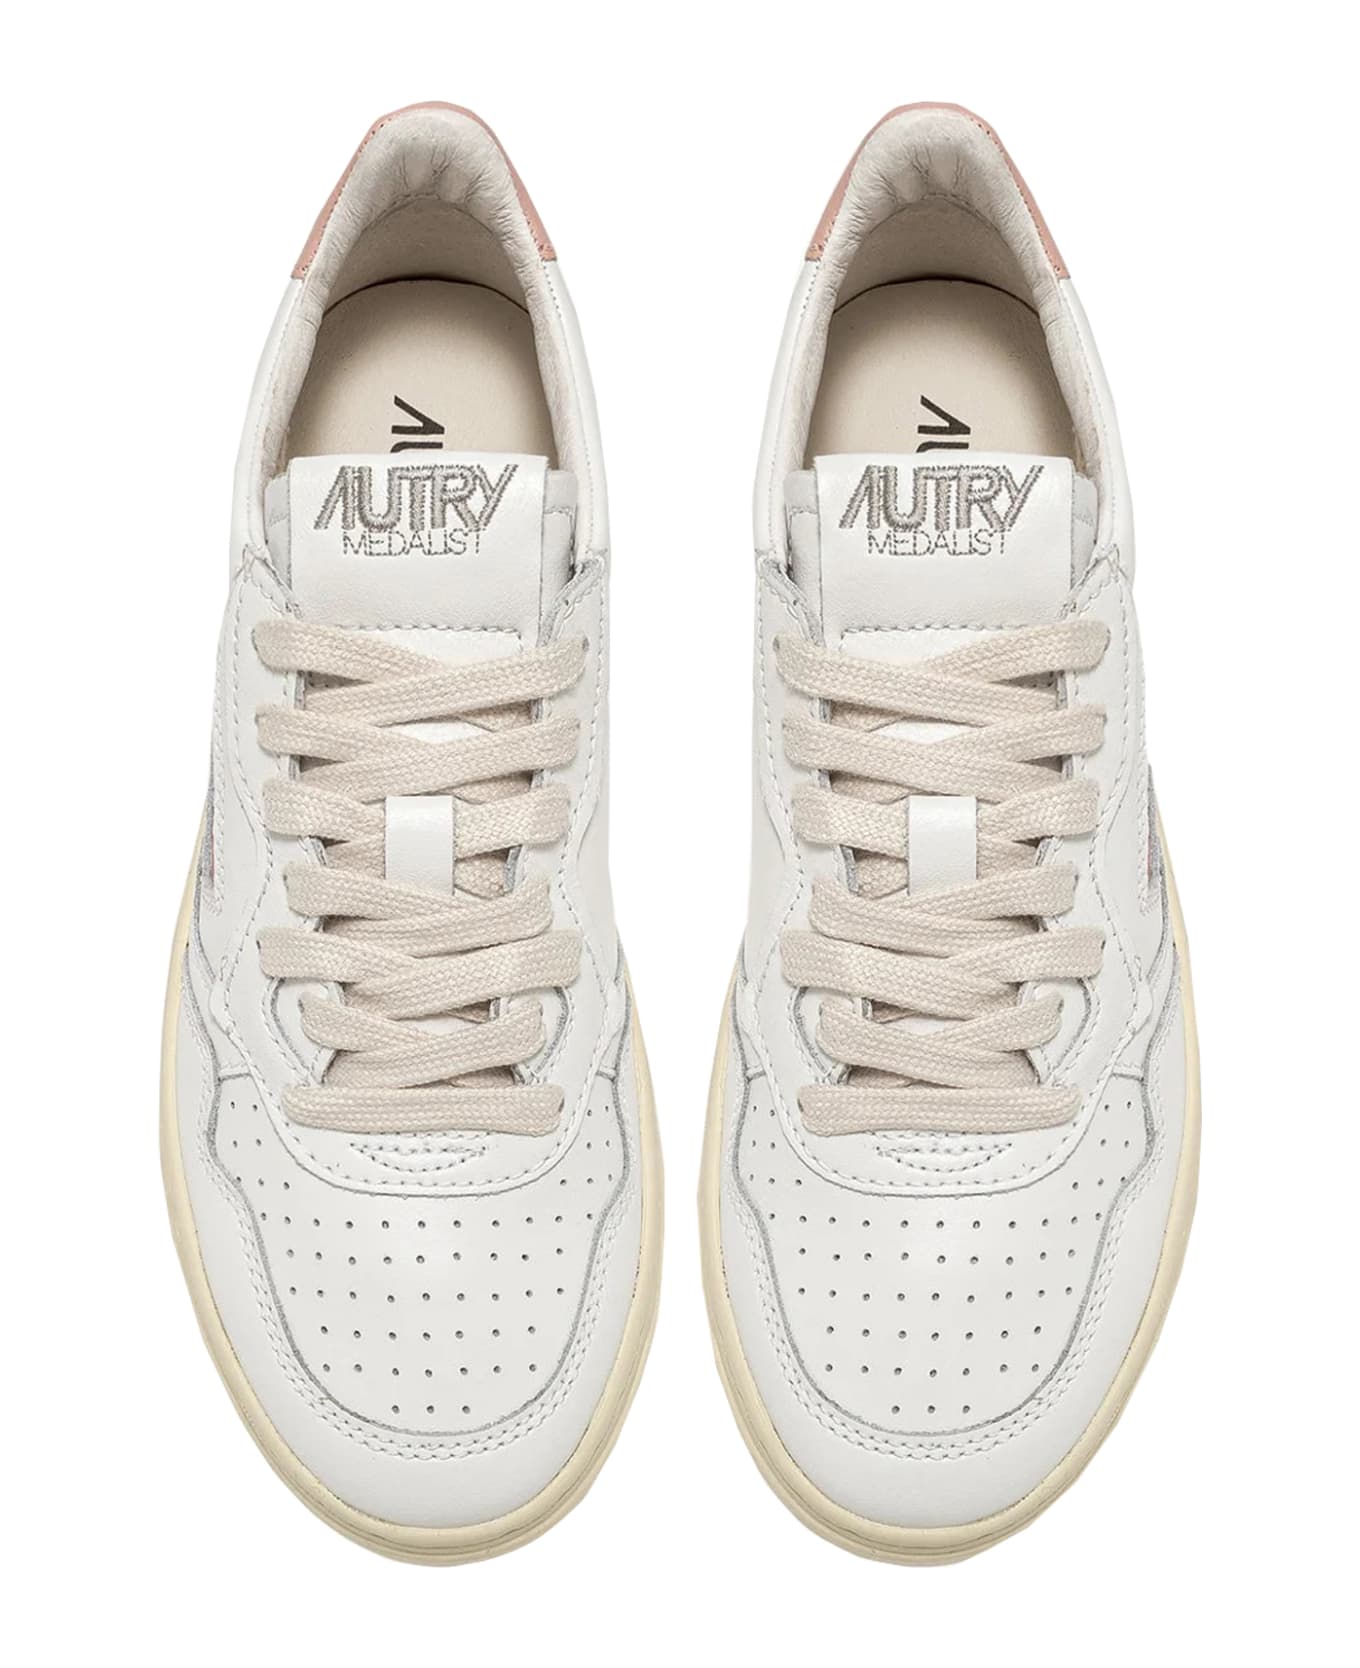 Autry Medalist Low - Pink